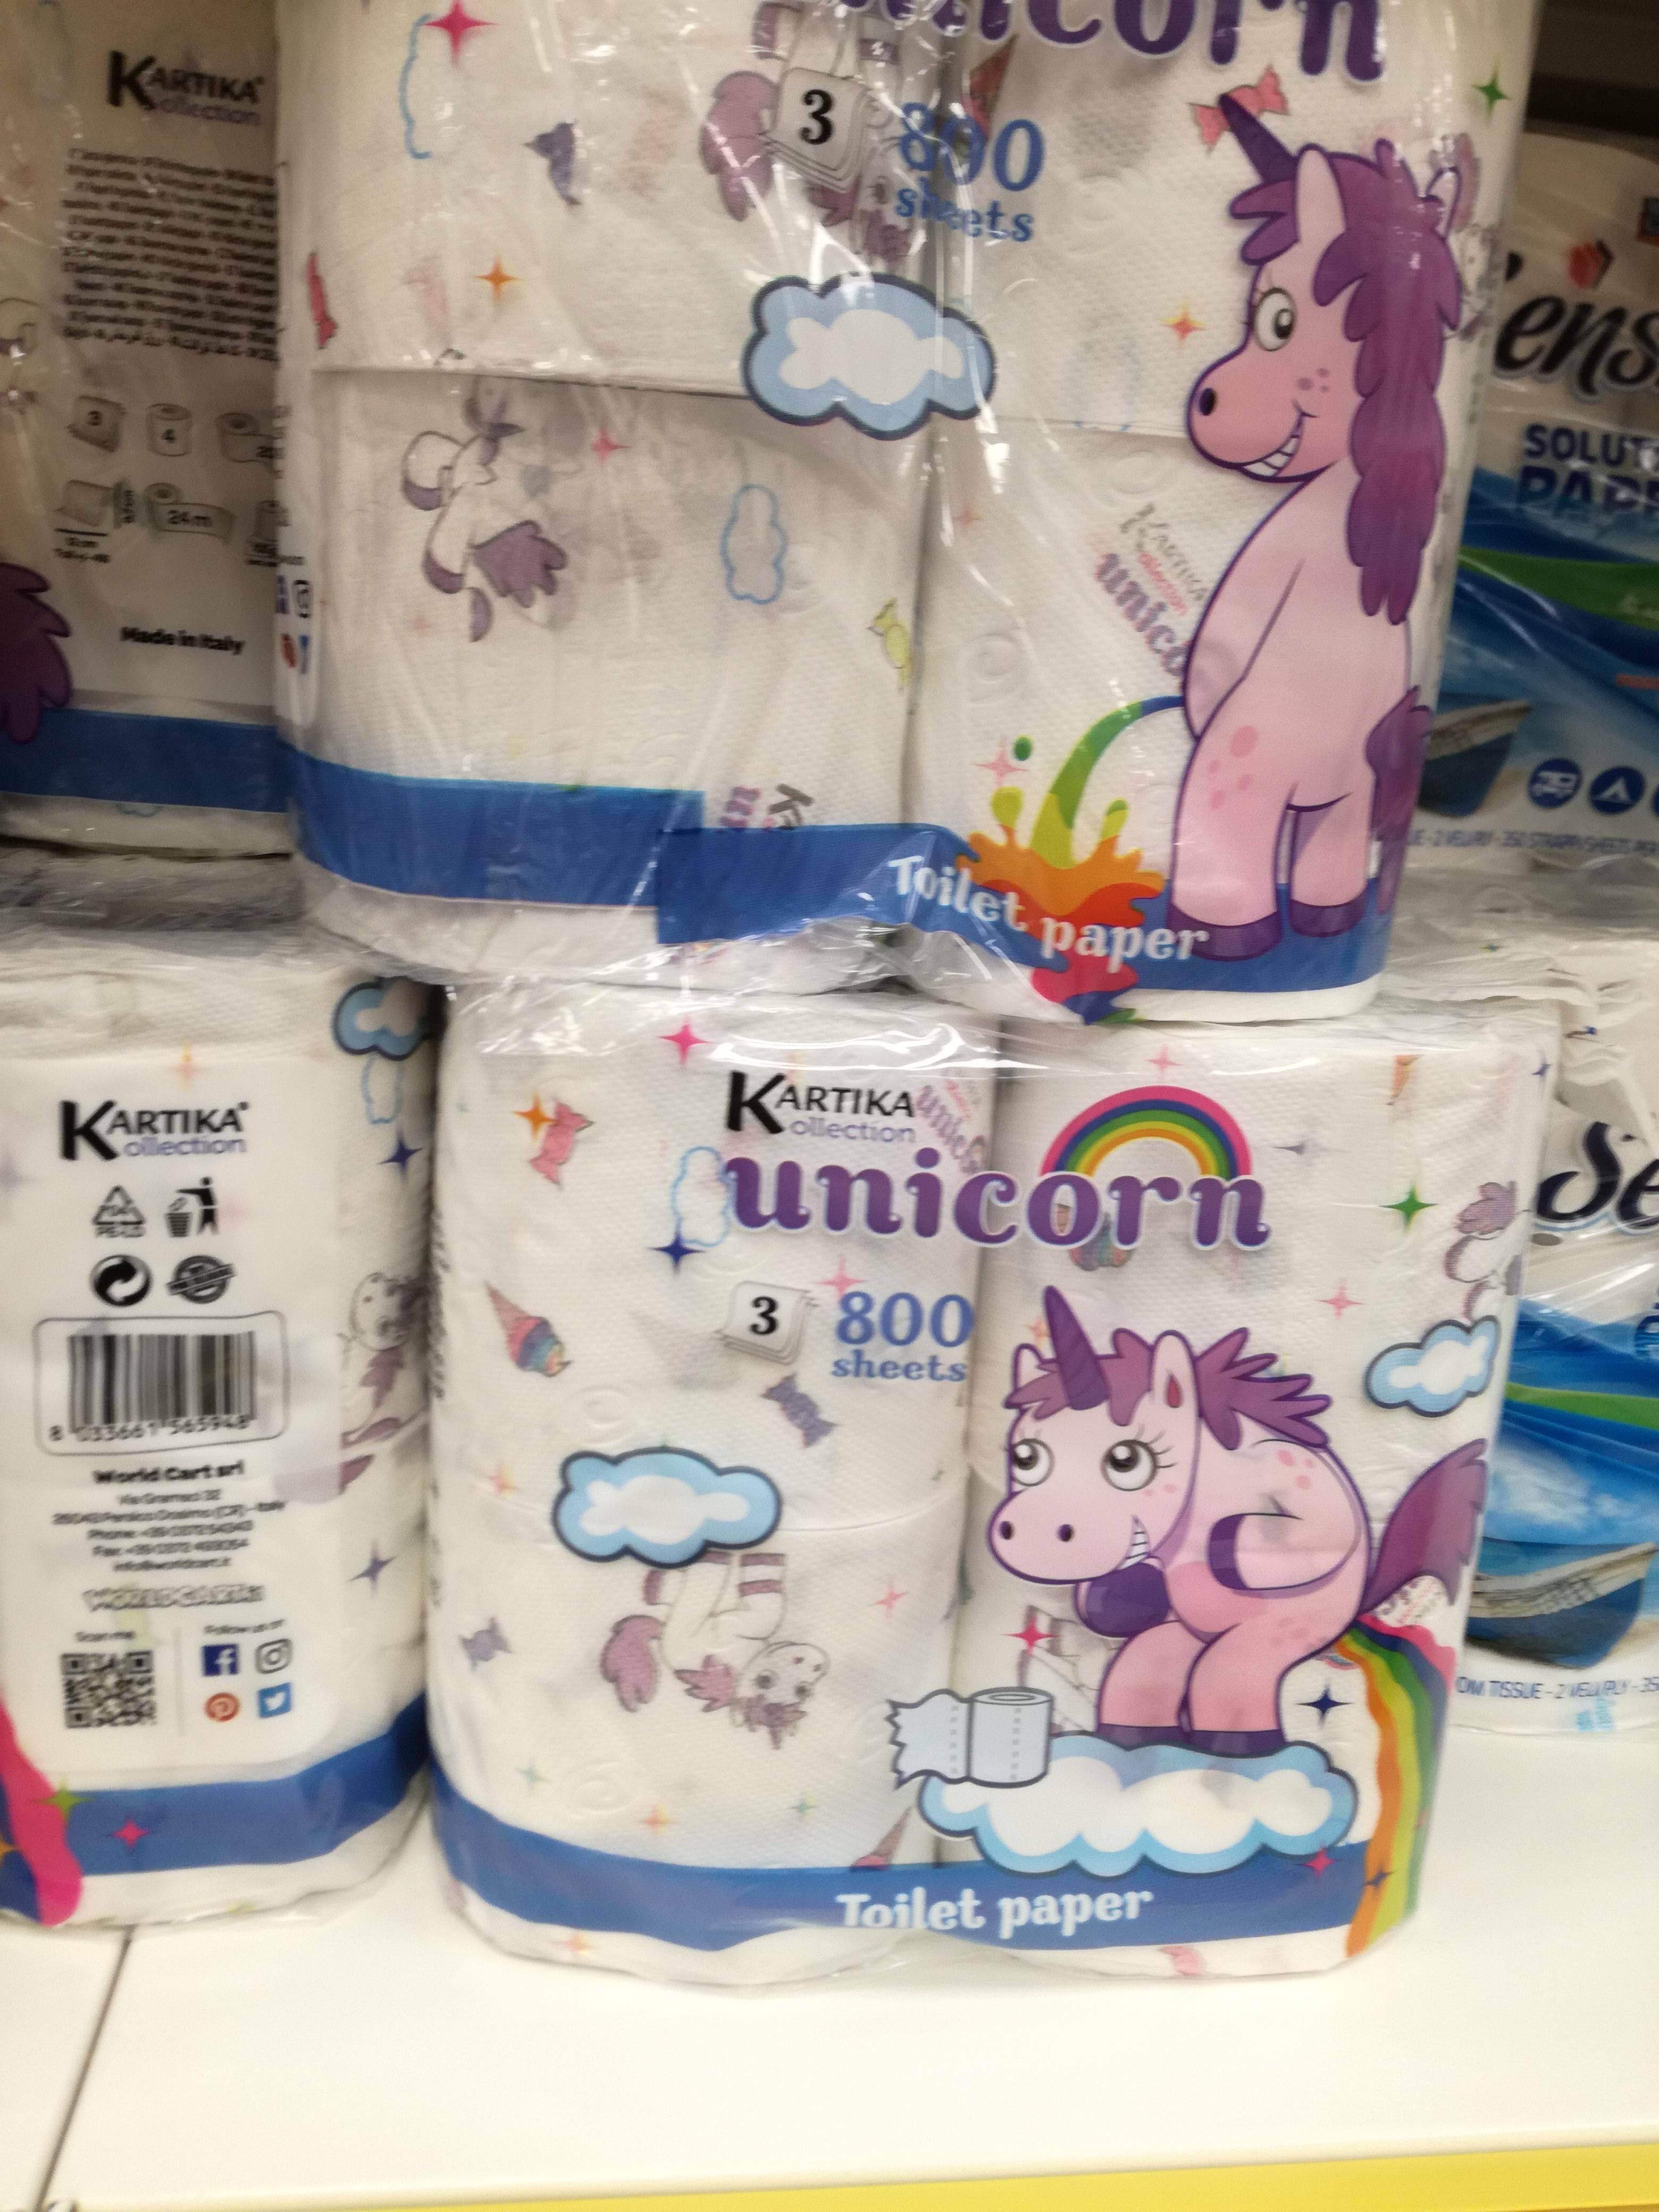 I found this weird toilet paper at the local store yesterday.....